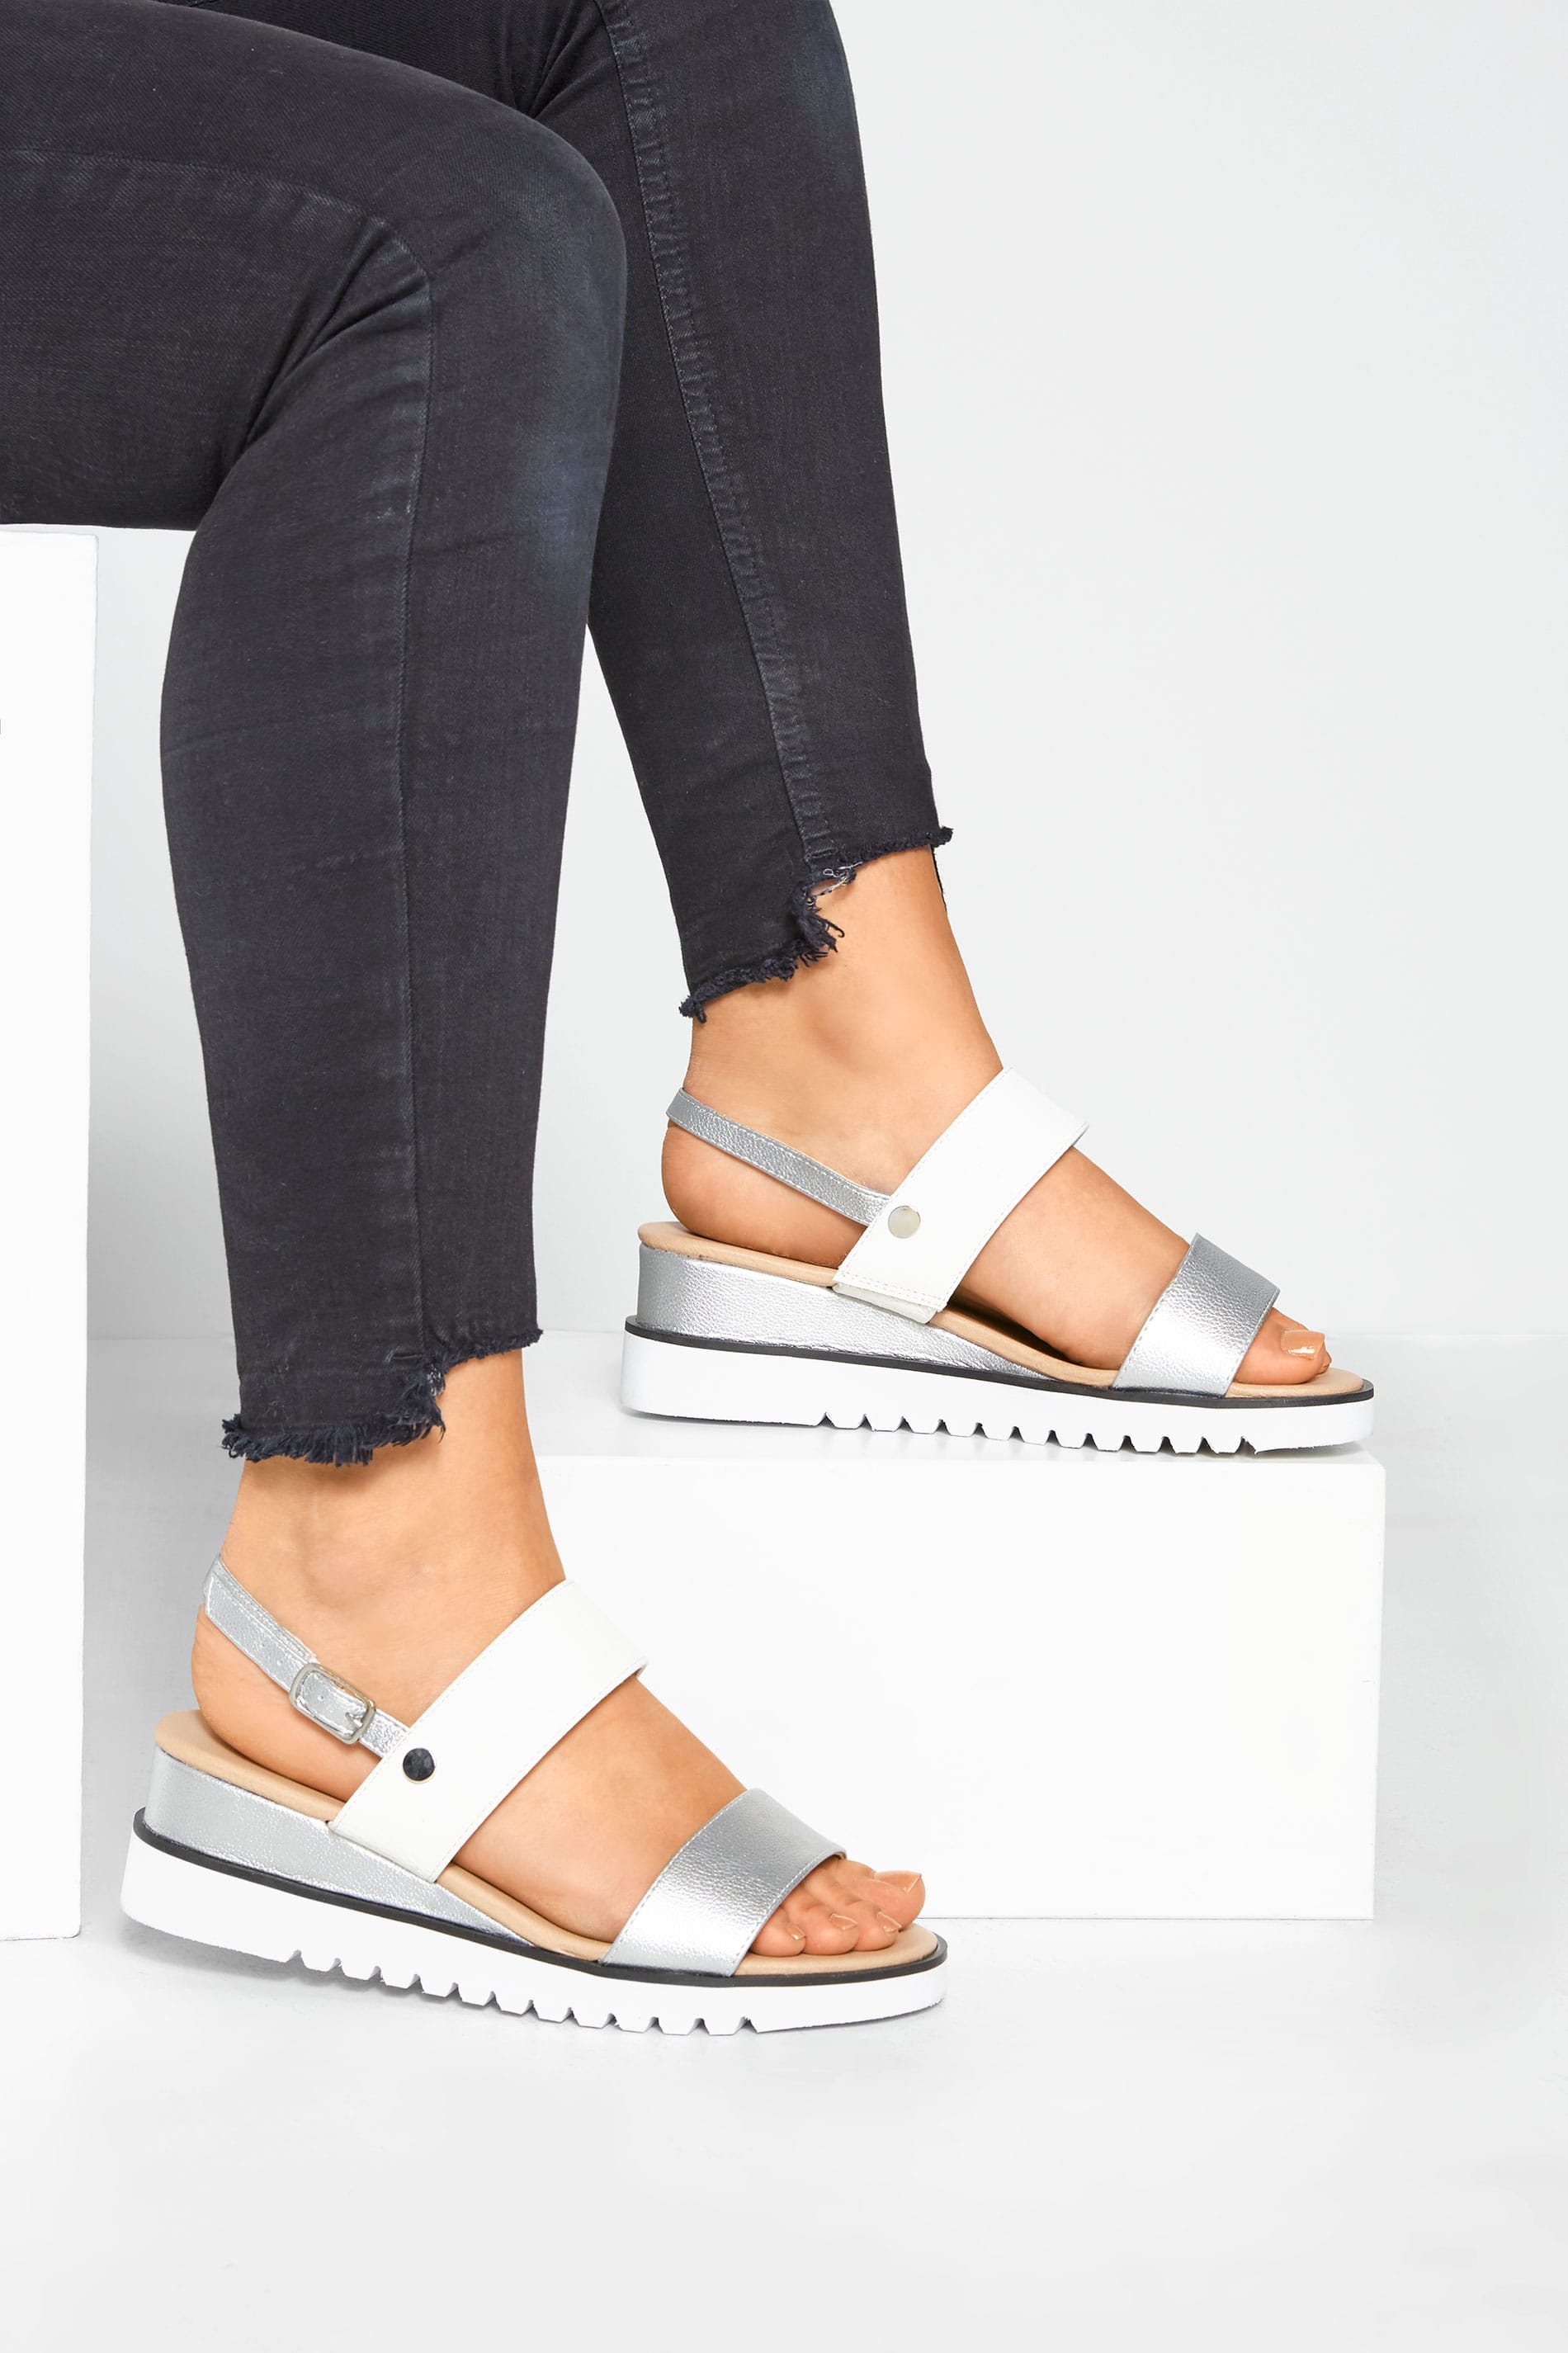 White \u0026 Silver Sporty Wedge Sandals In 